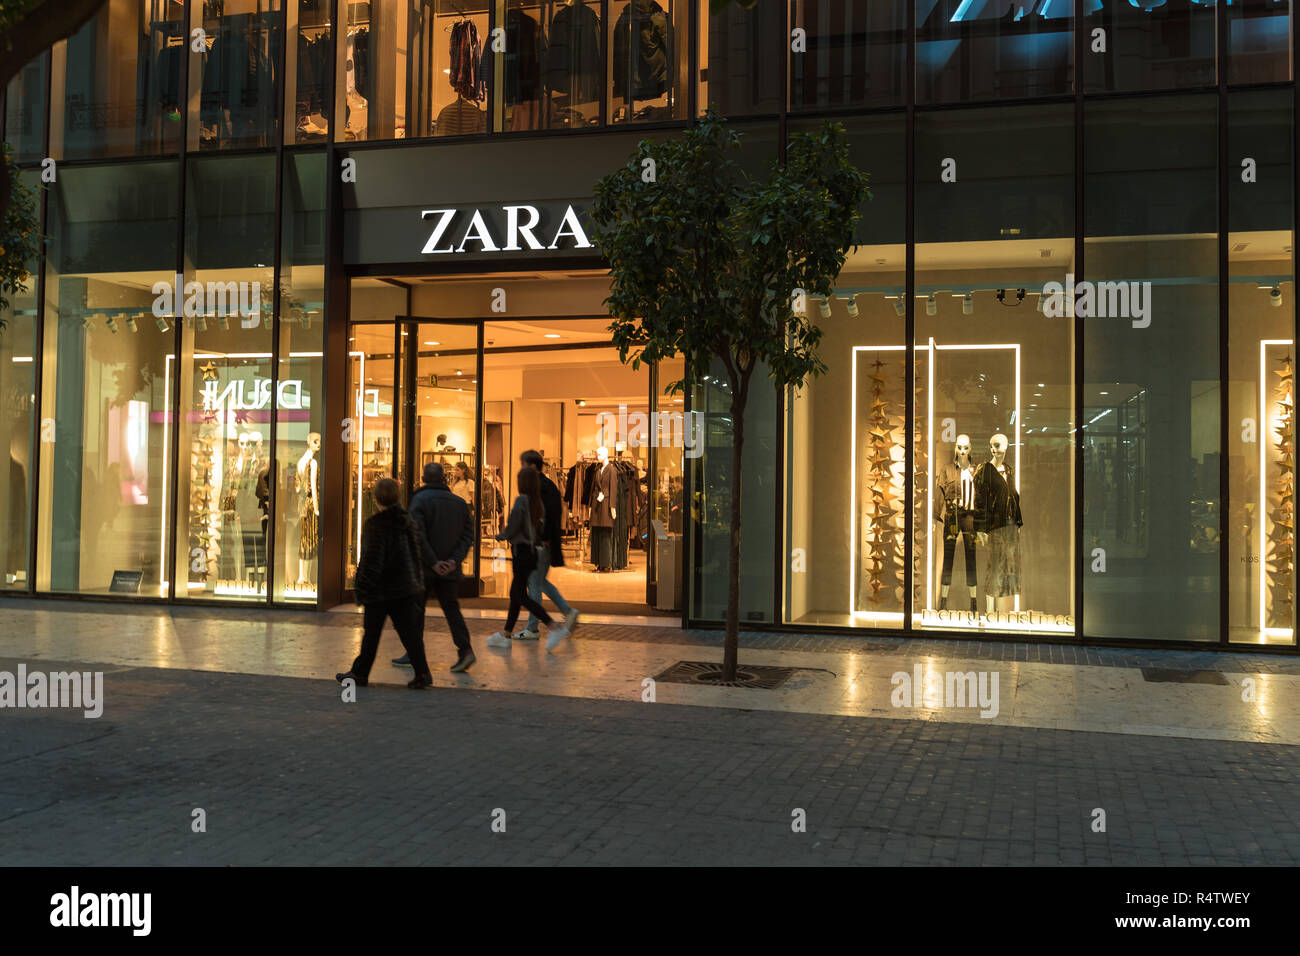 Valencia,Spain - November 25, 2018: Zara store in Valencia. Zara is a  Spanish clothing and accessories retailer Zara store. People walking in and  out Stock Photo - Alamy